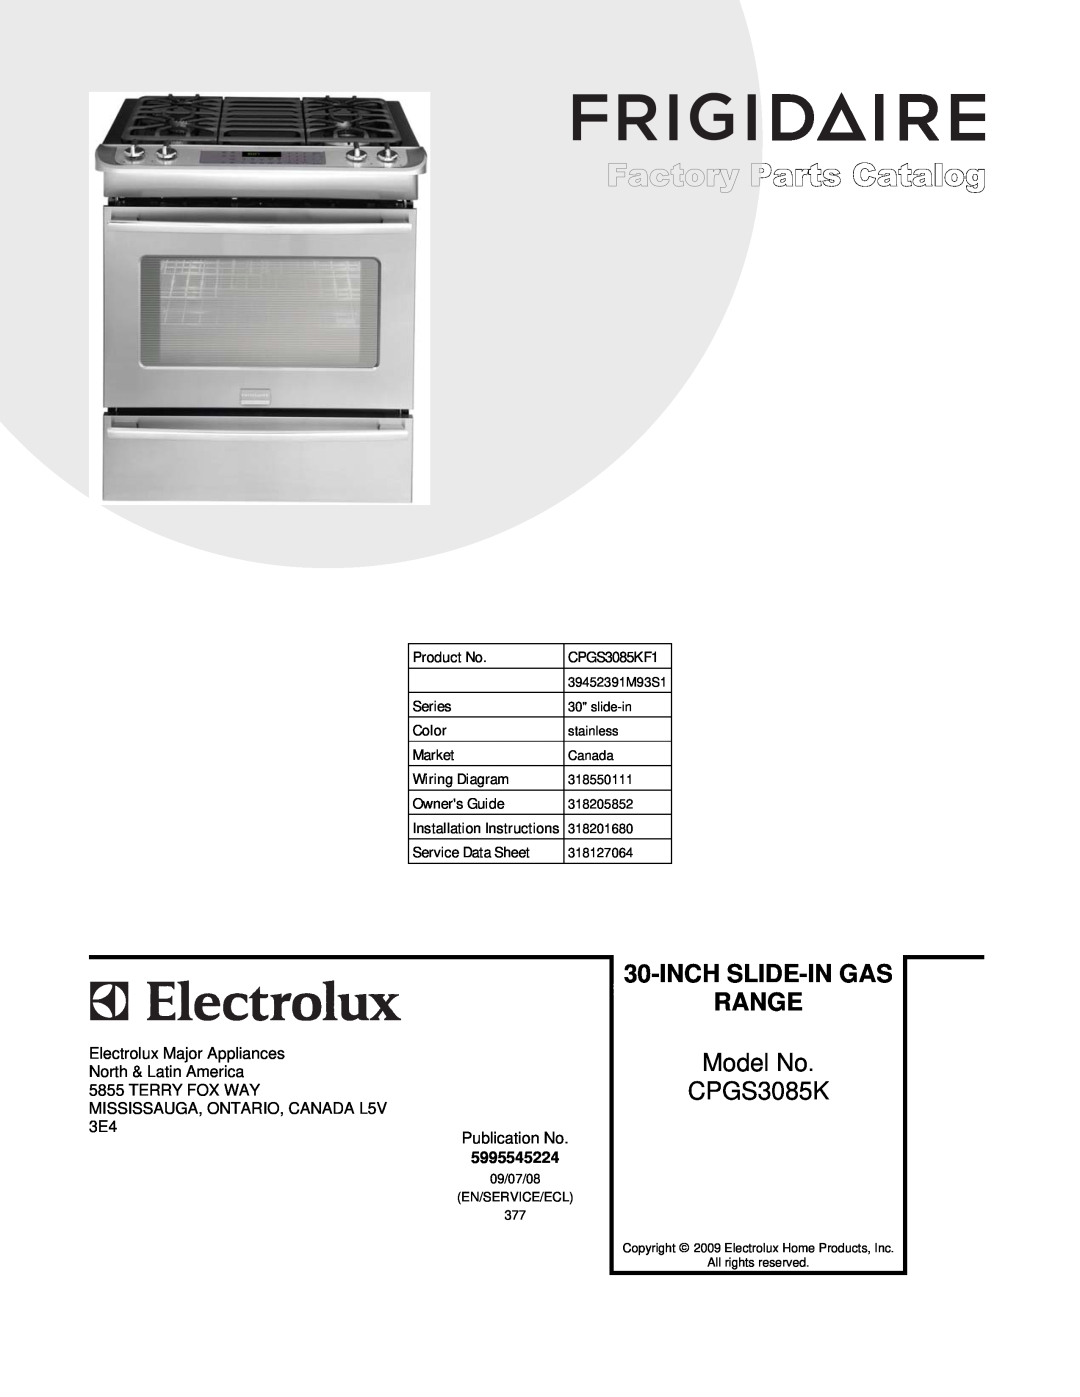 Electrolux 39452391M93S1 installation instructions Product No Series Color Market Wiring Diagram Owners Guide, CPGS3085KF1 